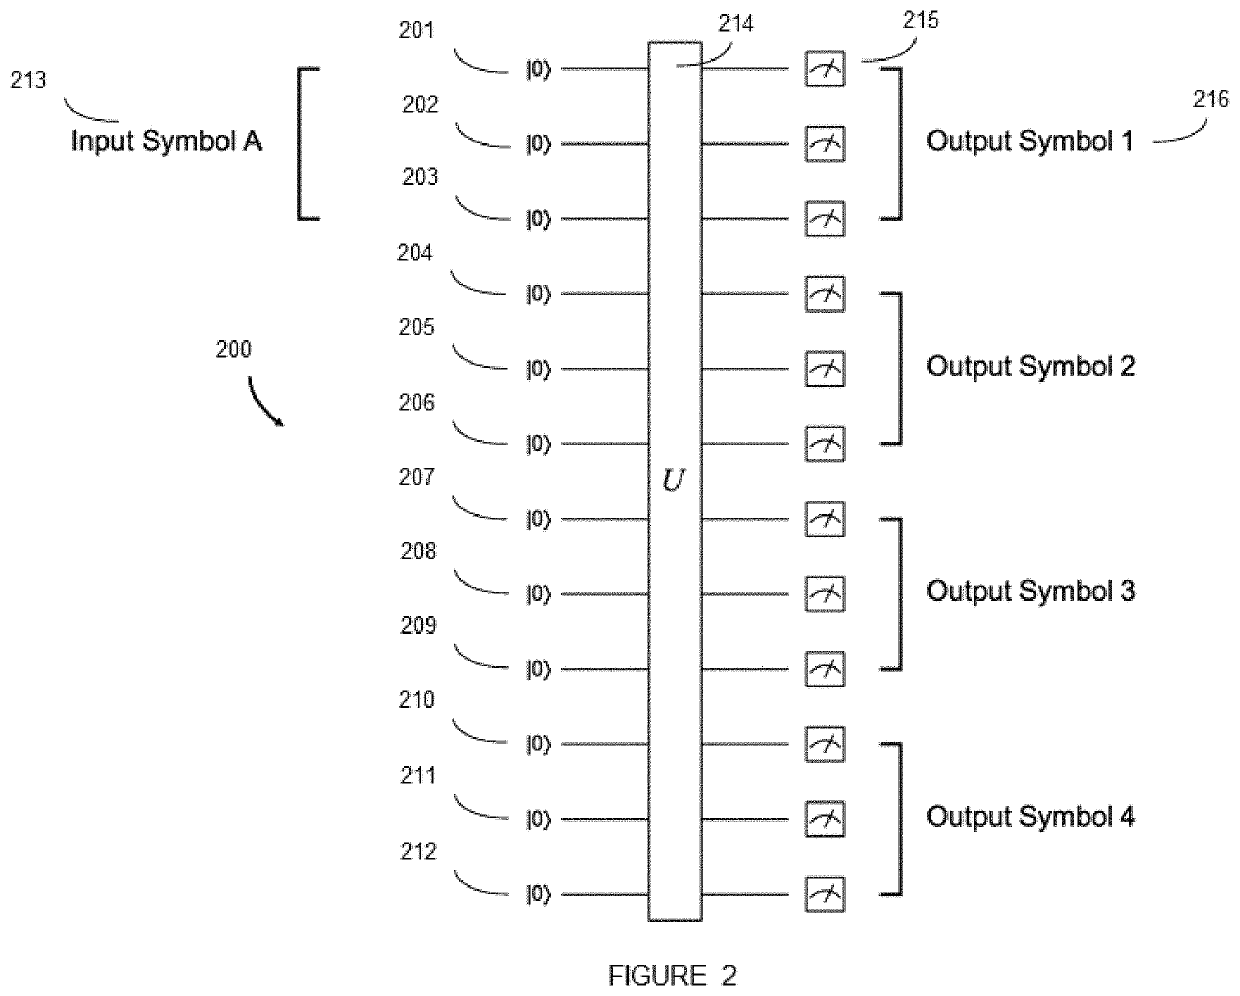 Systems, devices, and methods for generating symbol sequences and families of symbol sequences